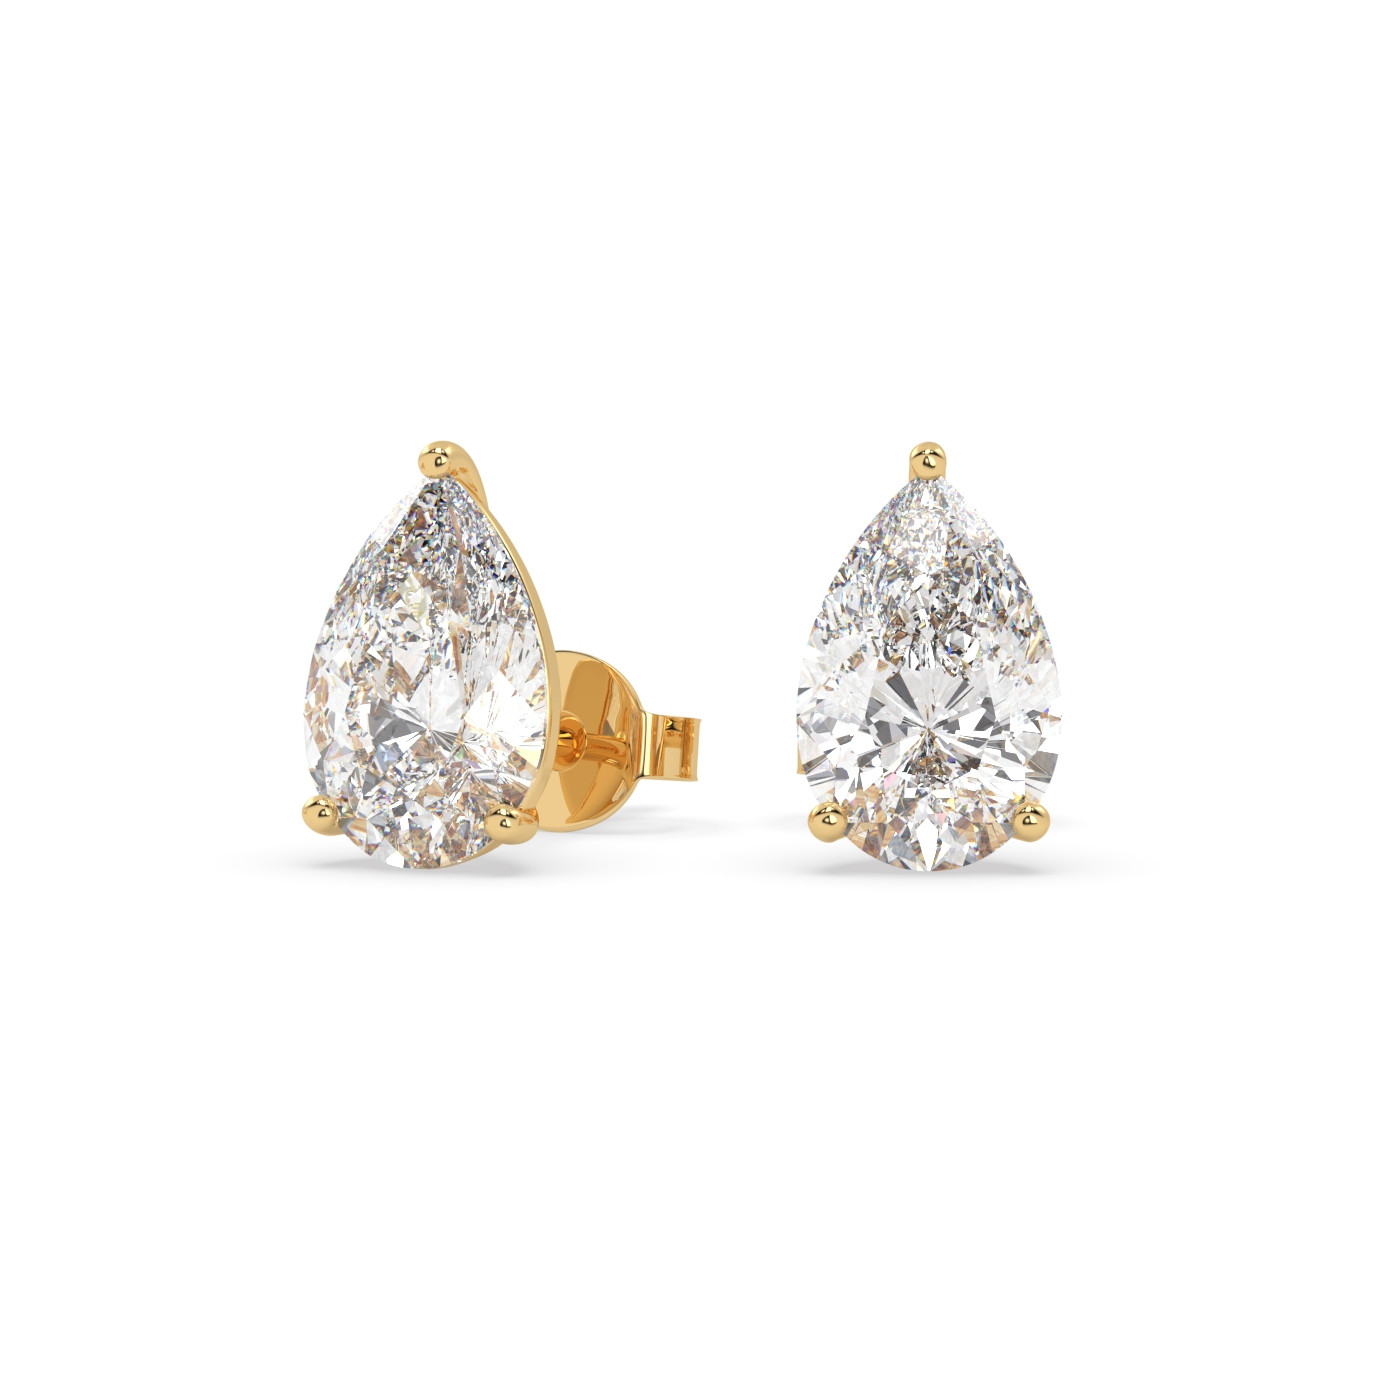 18k yellow gold  1.4 carat pear stud earrings with butterfly back Photos & images